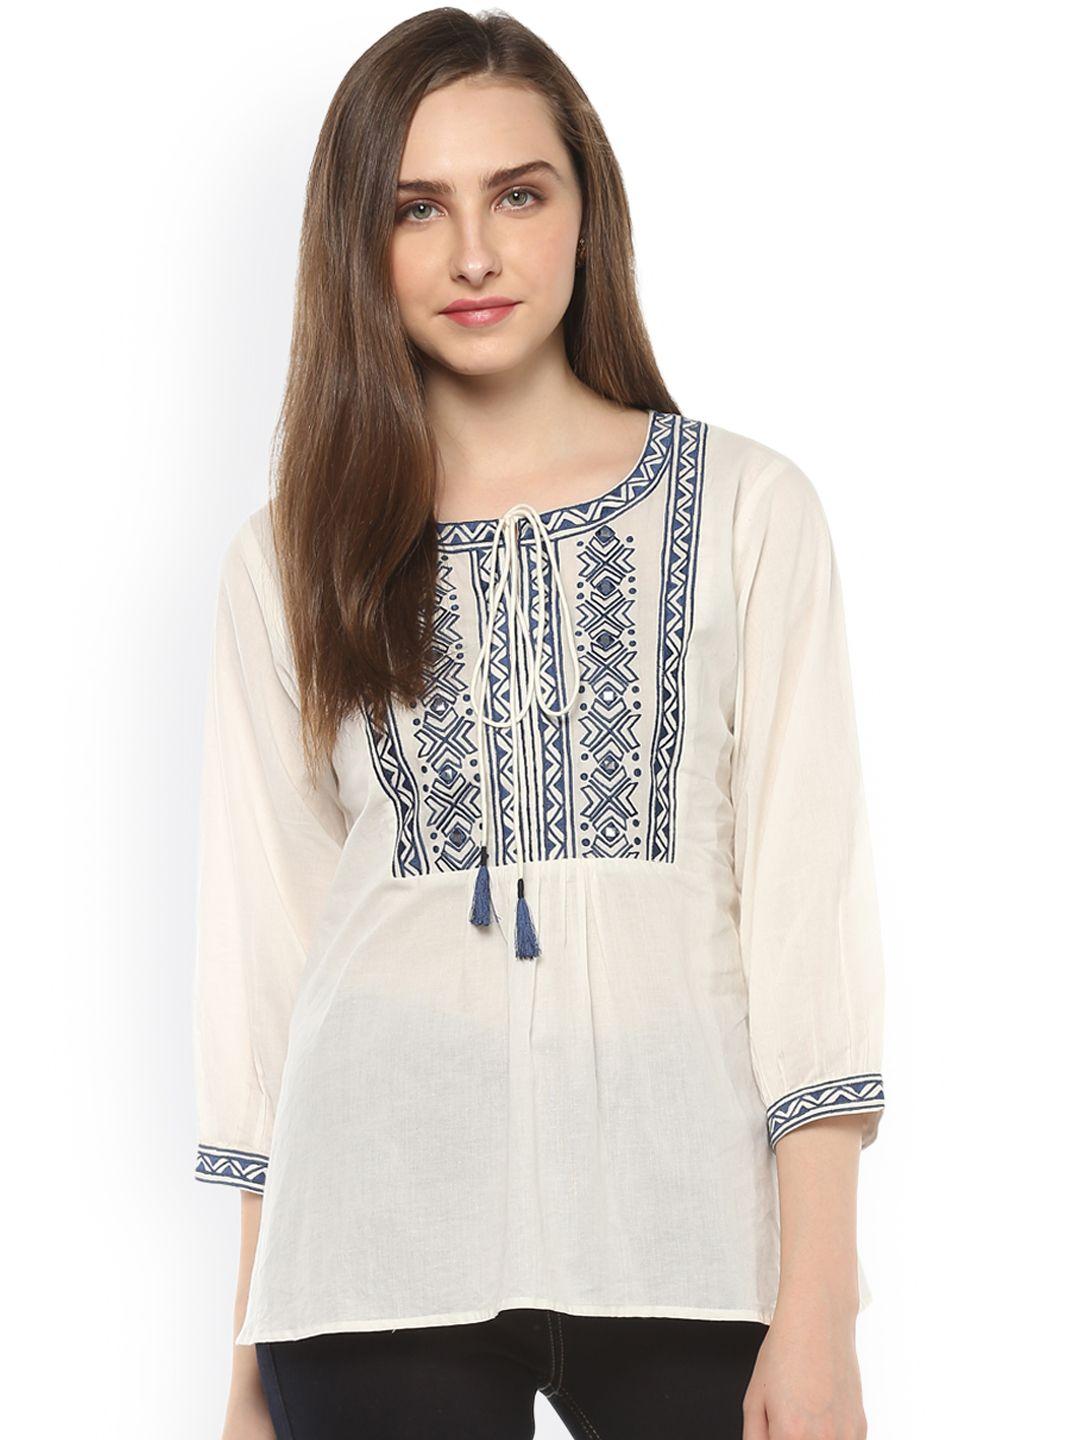 bhama couture women off-white solid pure cotton top